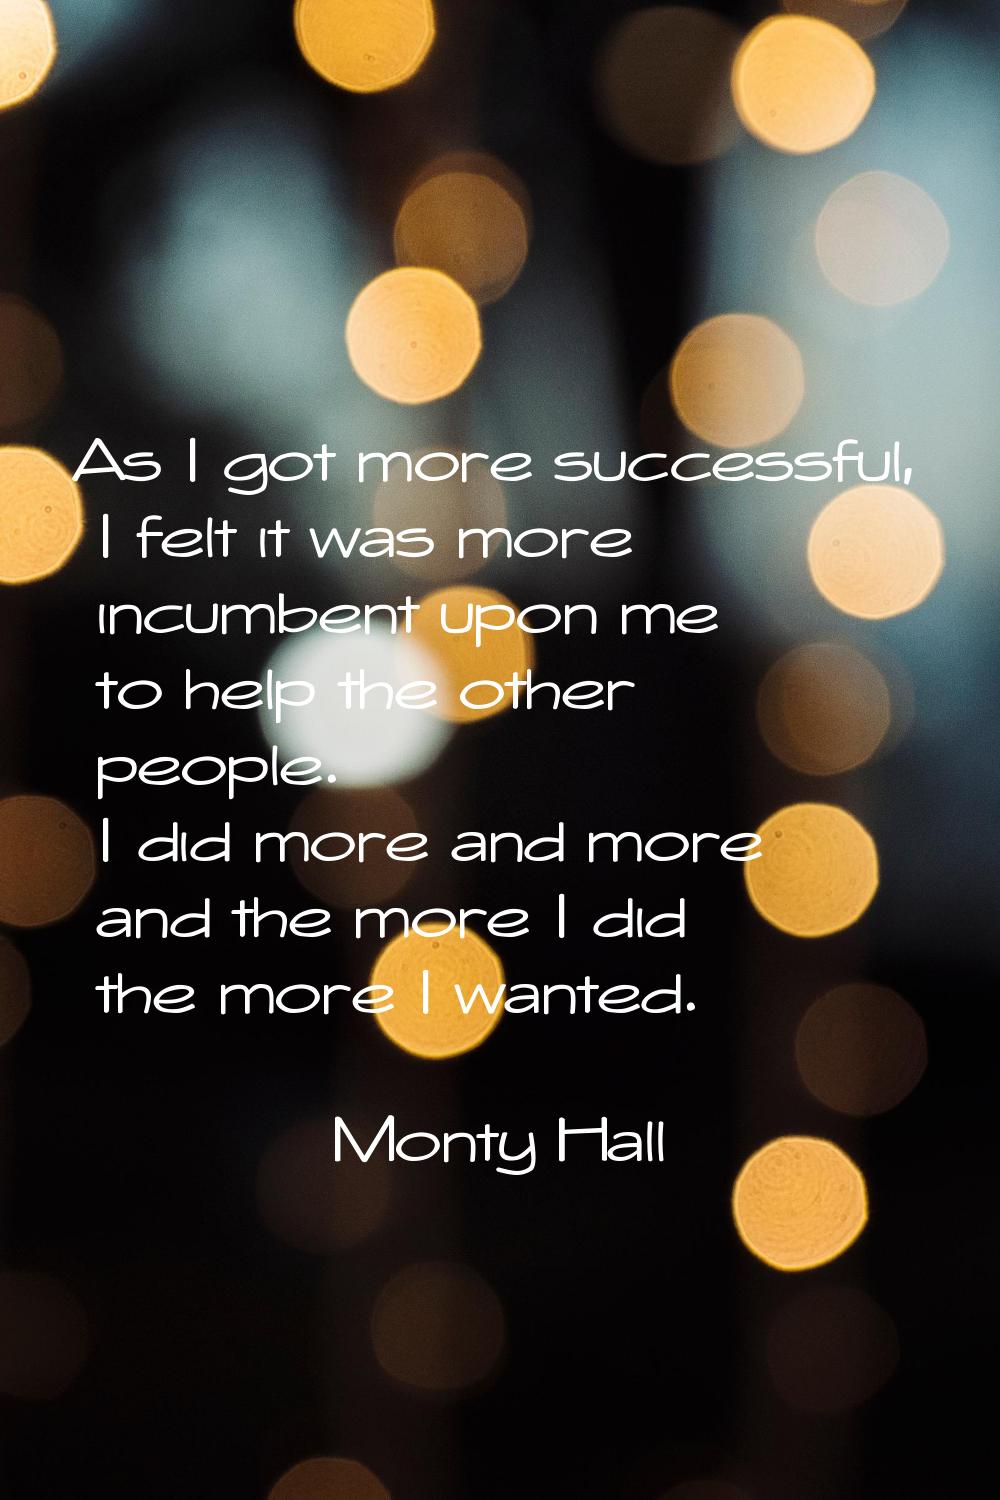 As I got more successful, I felt it was more incumbent upon me to help the other people. I did more